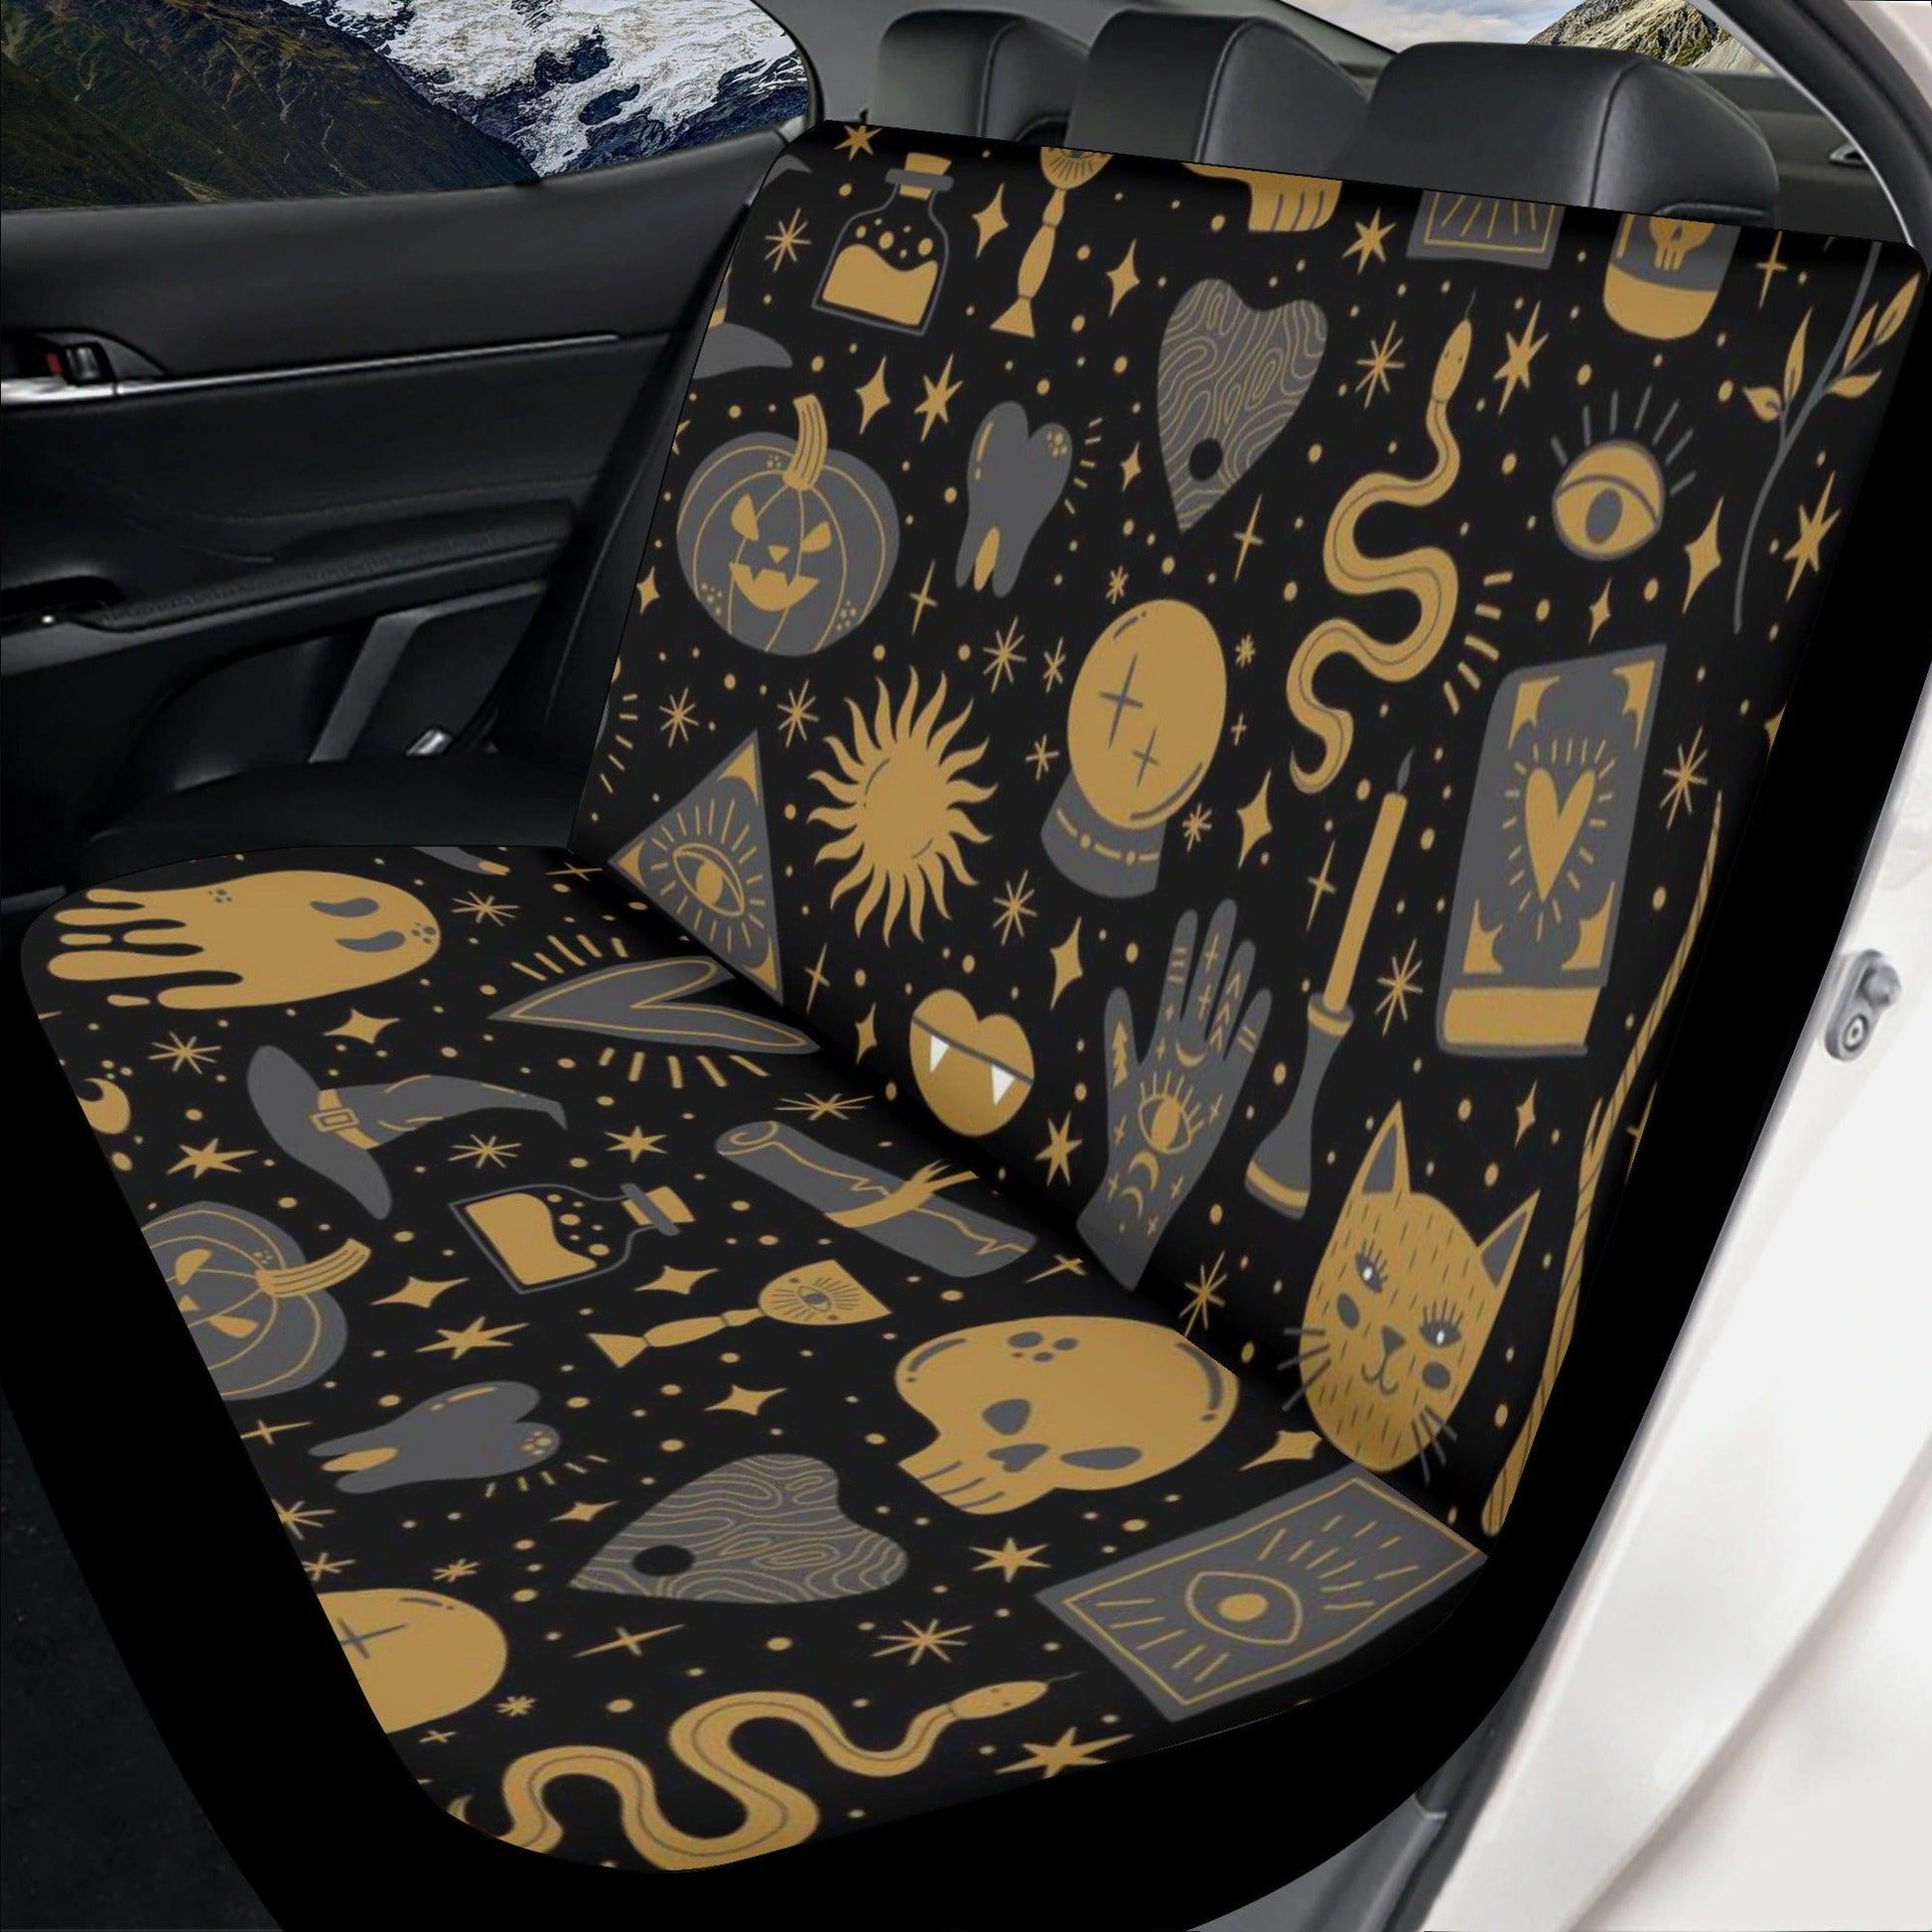 Car Seat Covers & Accessories